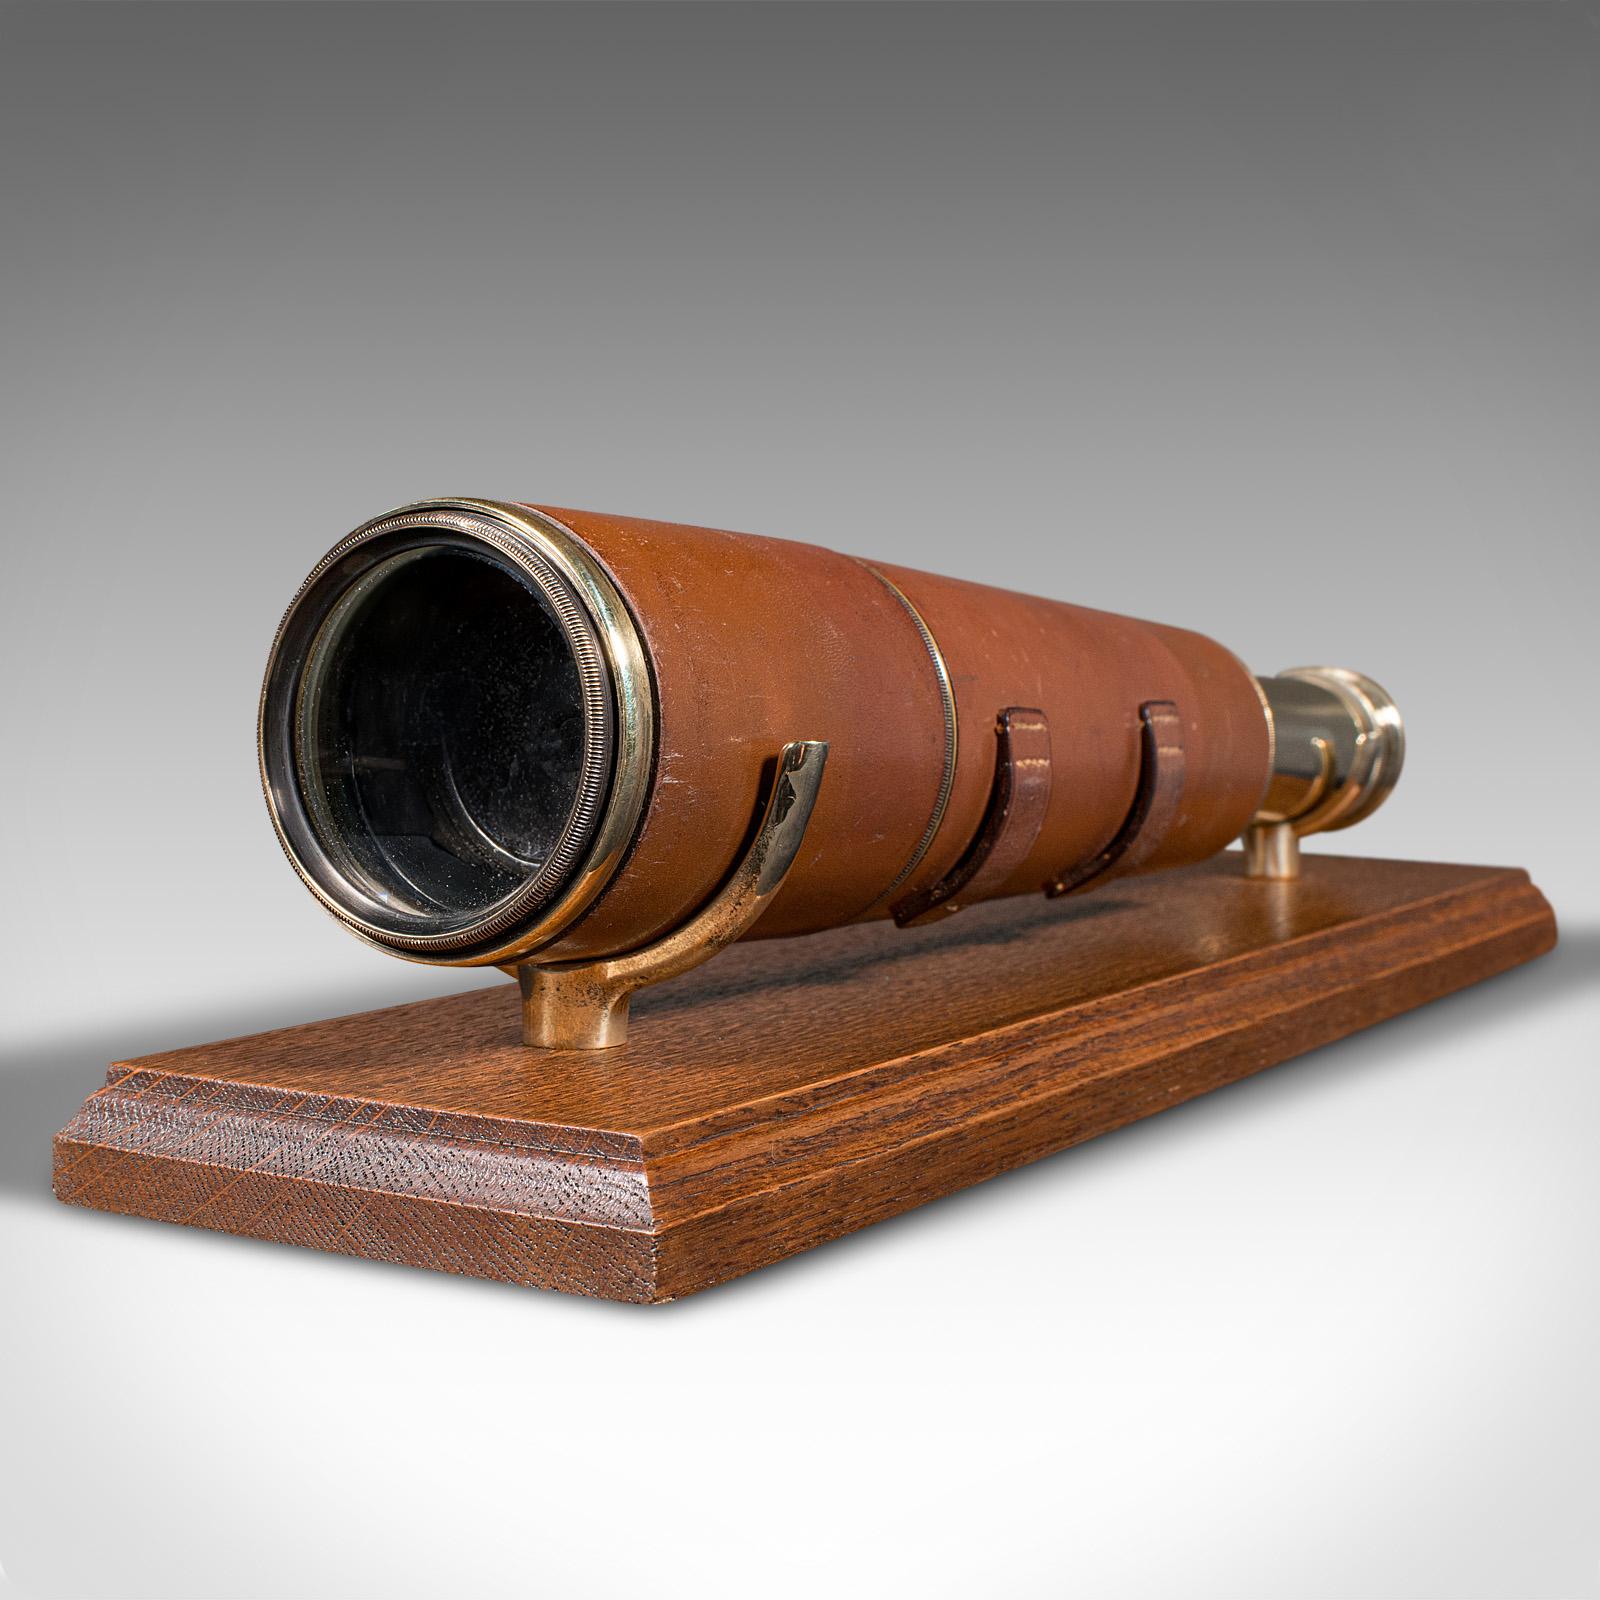 20th Century Antique 3 Draw Telescope, English, Brass, Leather, Terrestrial, Astro, Great War For Sale